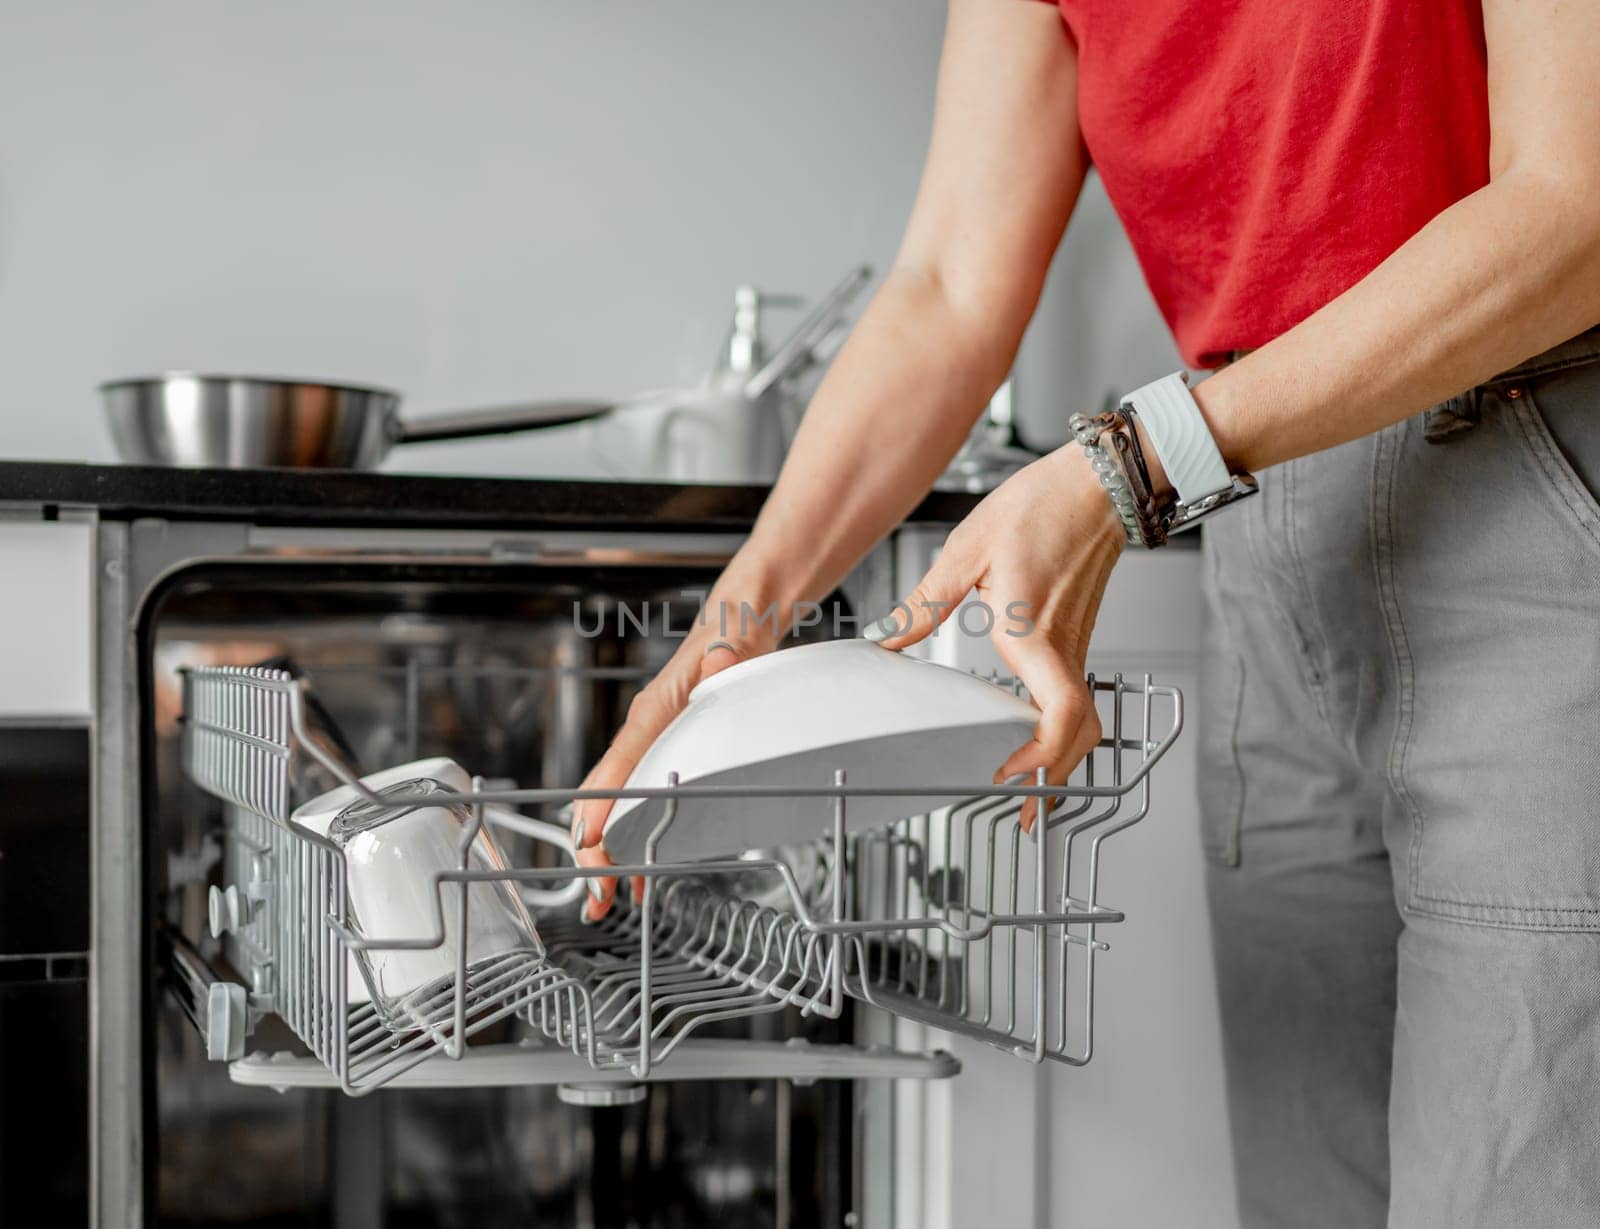 Young Woman Takes Out Clean Dishes From Dishwasher In Close-Up Shot